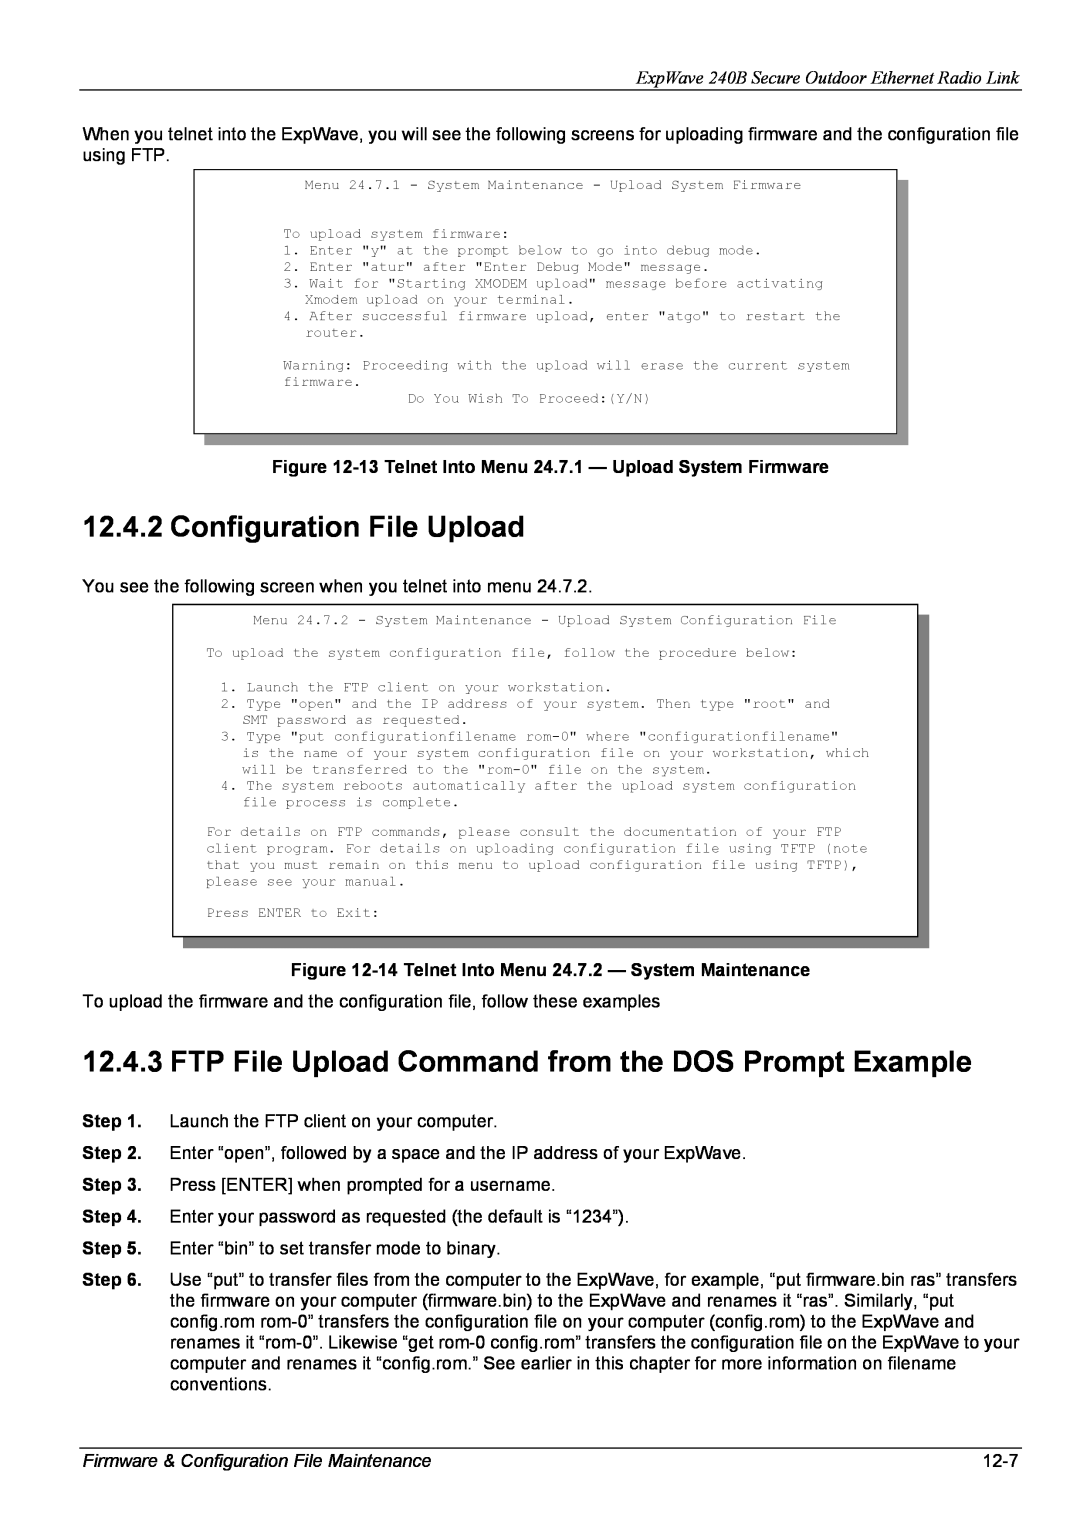 ZyXEL Communications 240B manual Configuration File Upload, FTP File Upload Command from the DOS Prompt Example, 12-7 